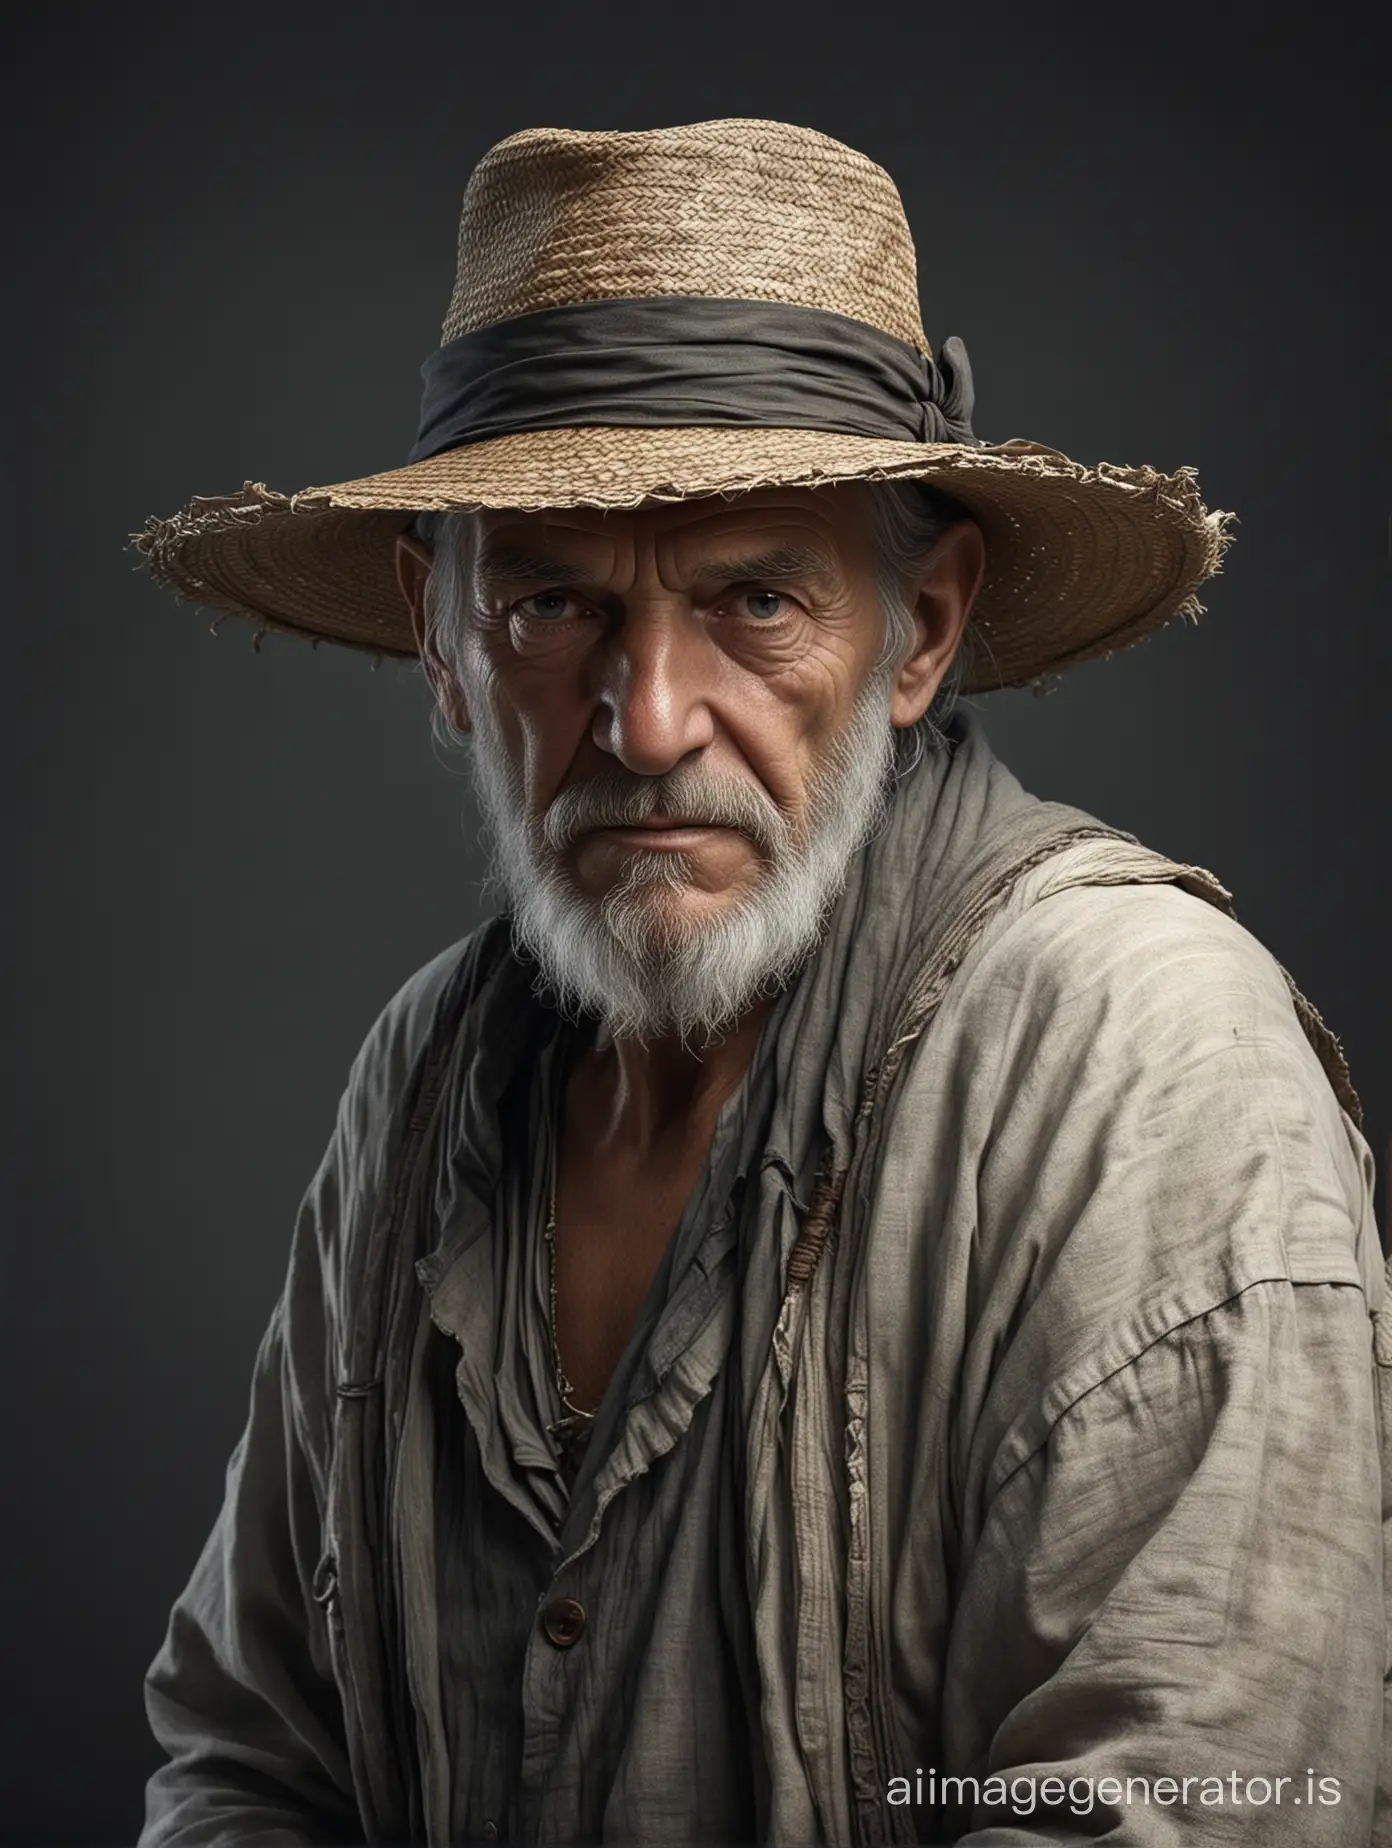 an old mysterious man with a gray and battered tunic wearing a straw hat user in a realistic style